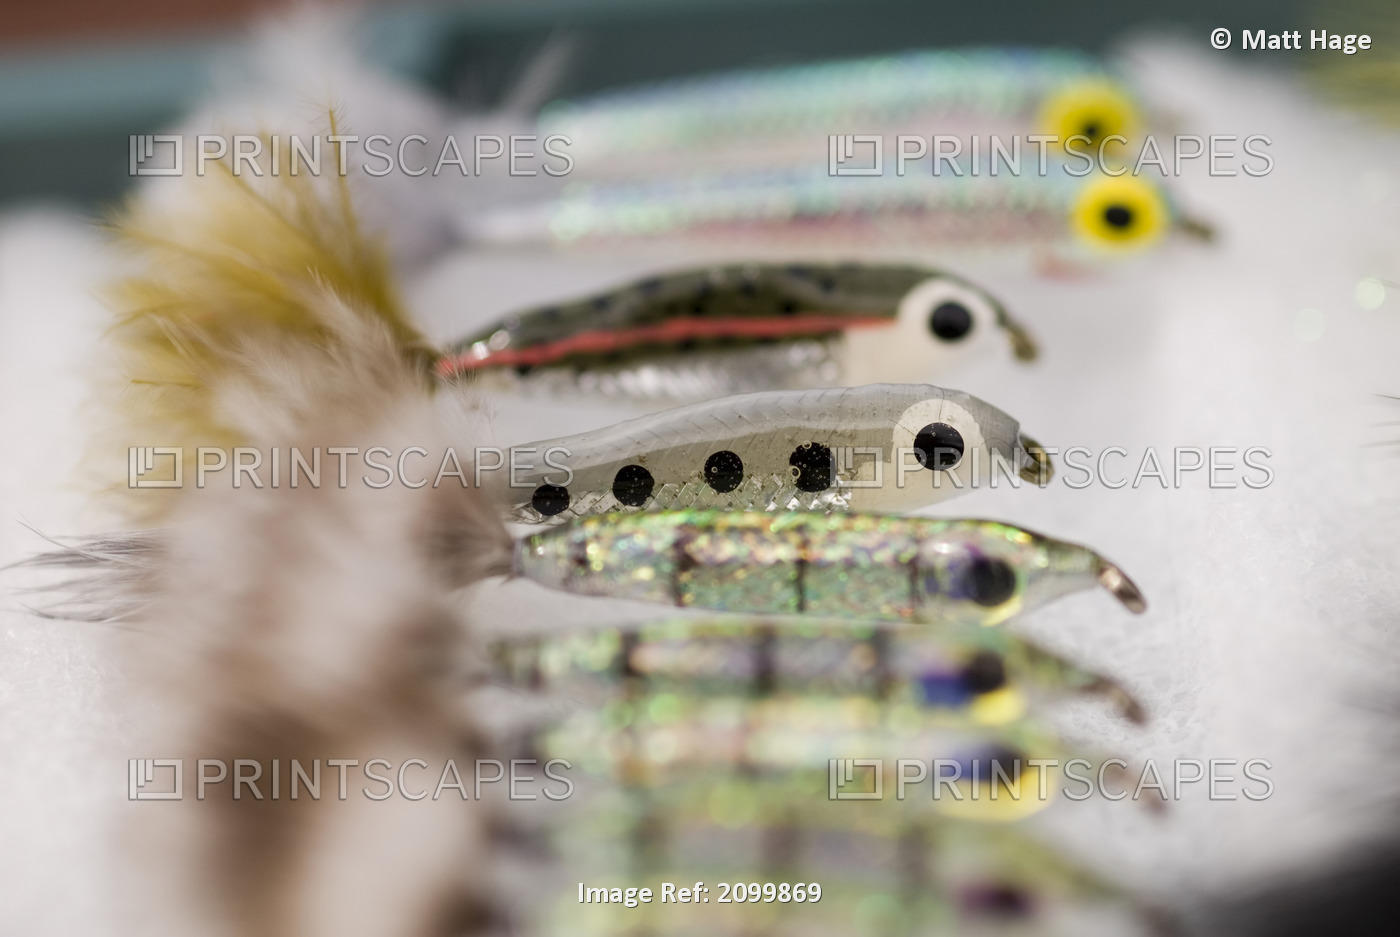 Minnow Patterns Are A Favorite For Early Season Trout Fishing In The Matanuska ...